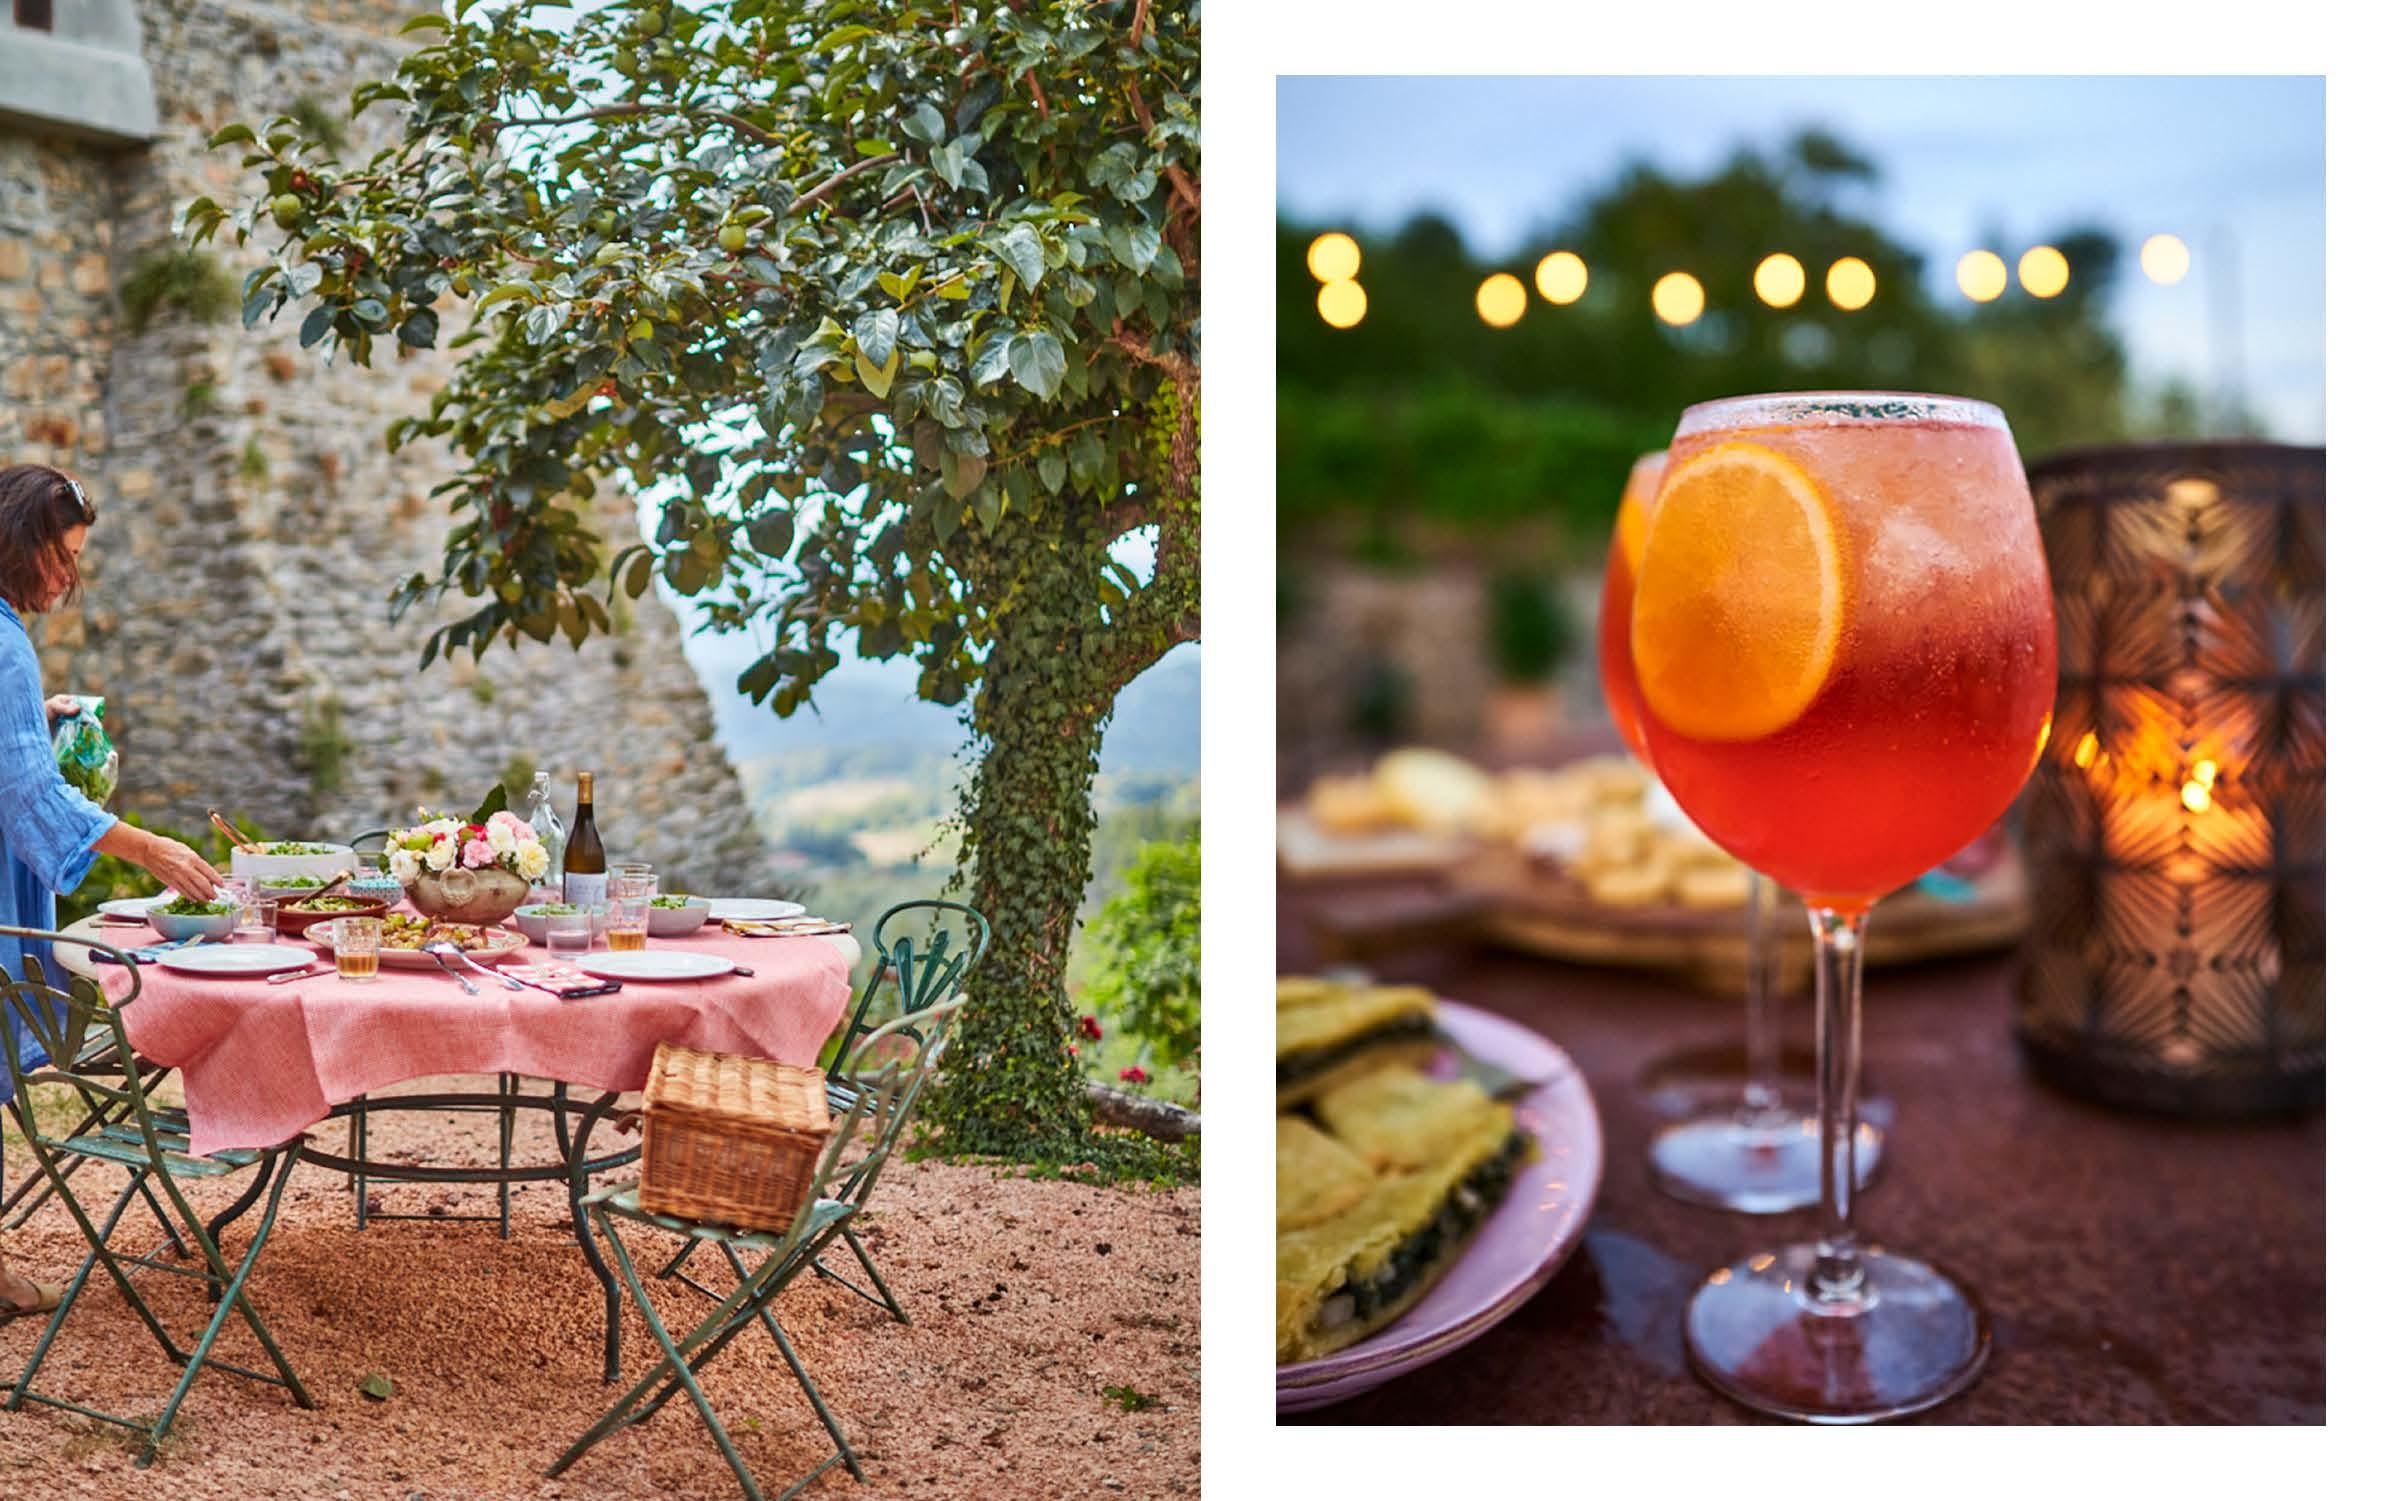 At the Table of La Fortezza: The Enchantment of Tuscan Cooking from the Lunigiana Region.
Author Annette Joseph, Photographs by David Loftus.

Annette Joseph shares recipes from the charming Lunigiana region of Tuscany that were developed at her